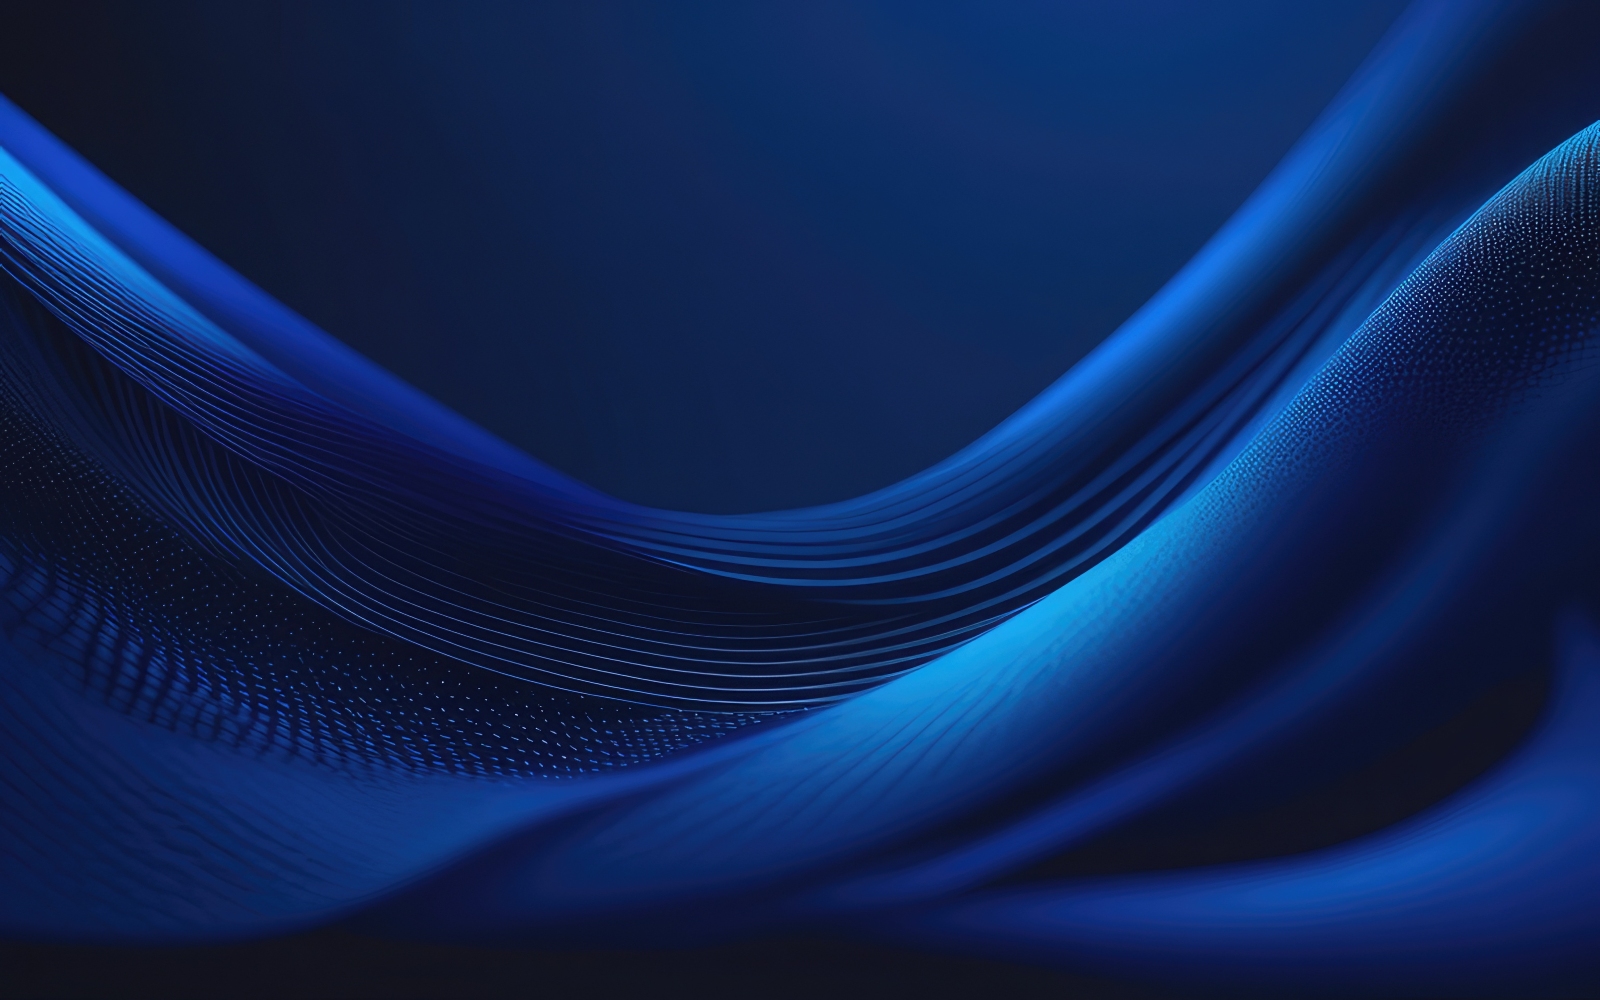 Premium High-quality Abstract 3D Blur Wave Background design